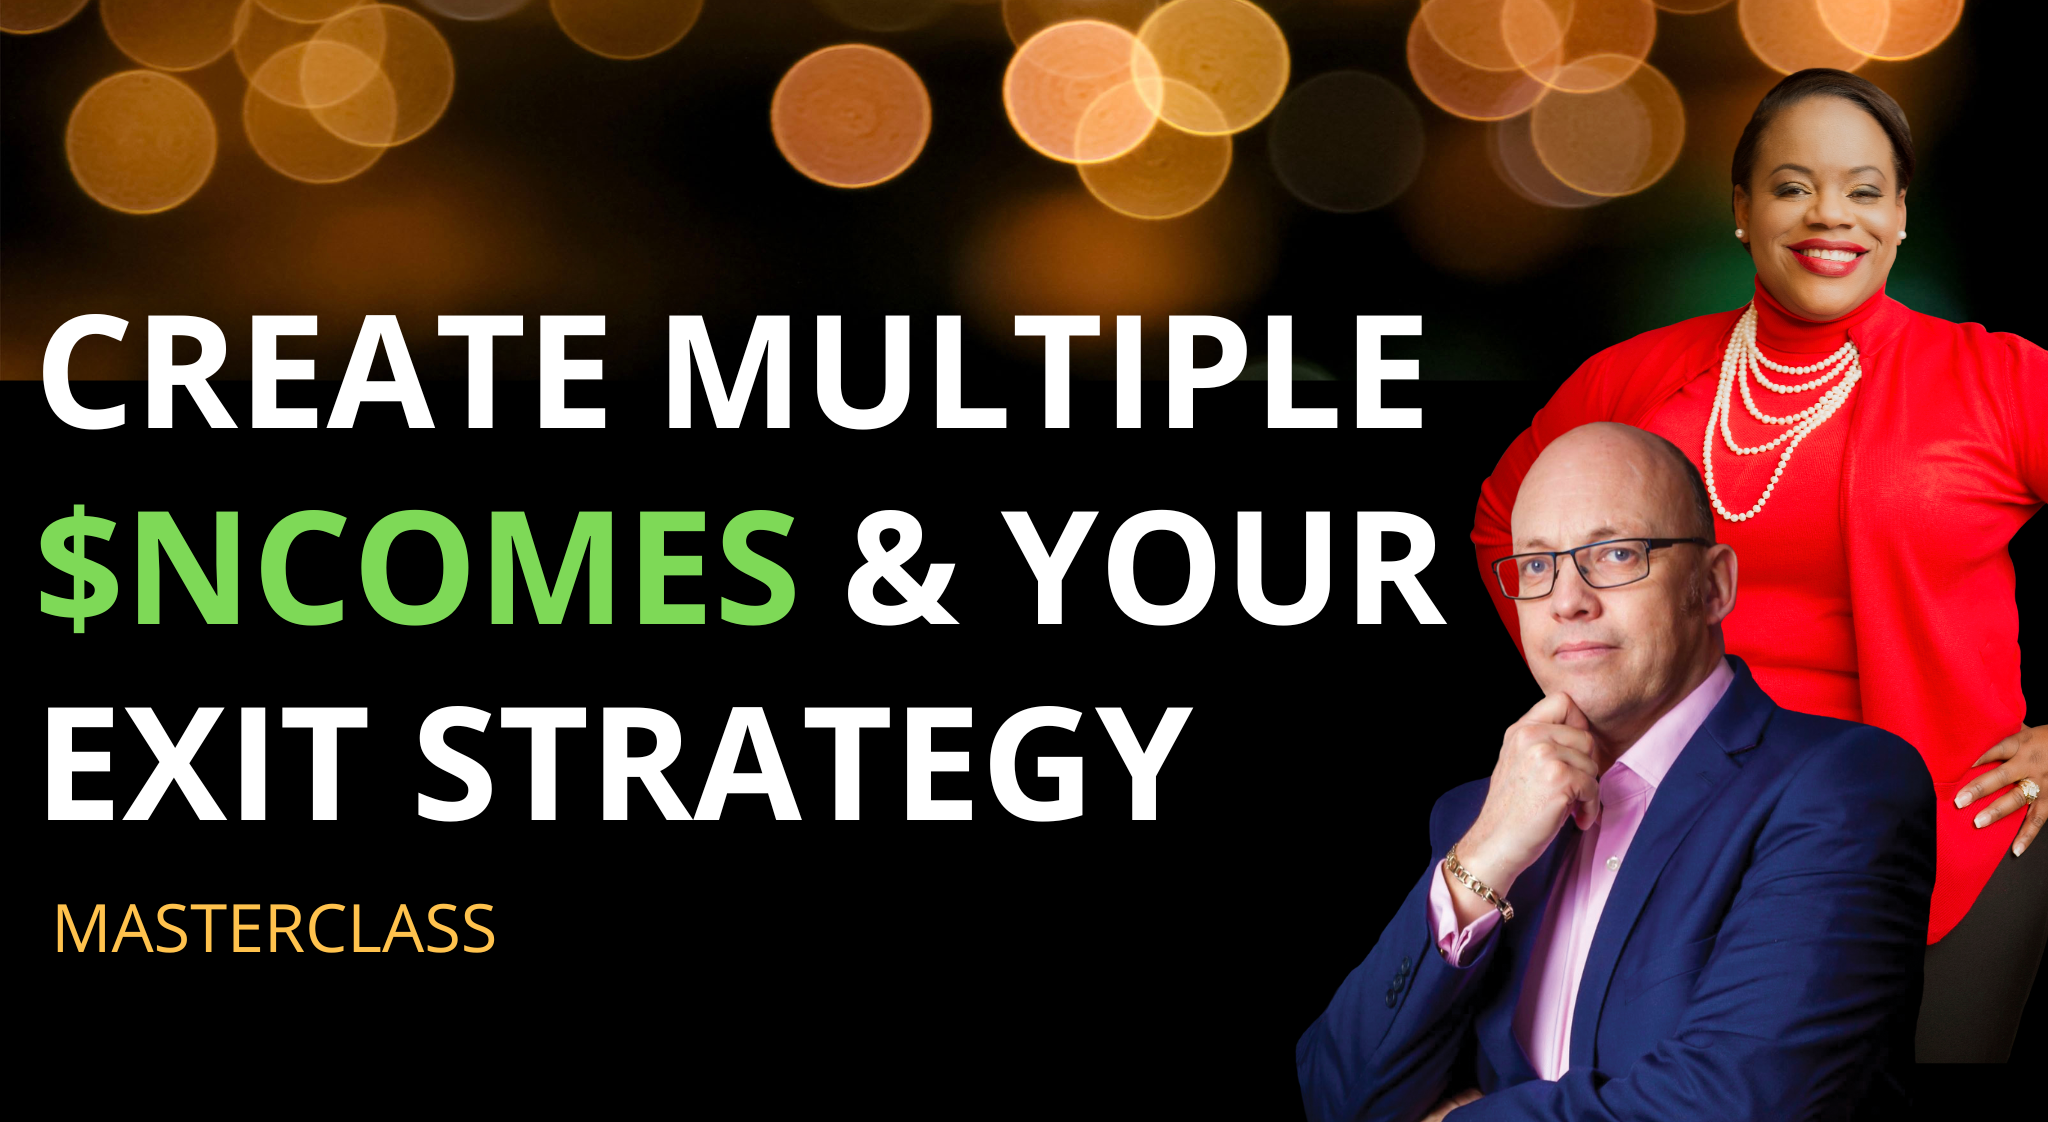 Create Multiple Incomes & Your Exit Strategy<br />
